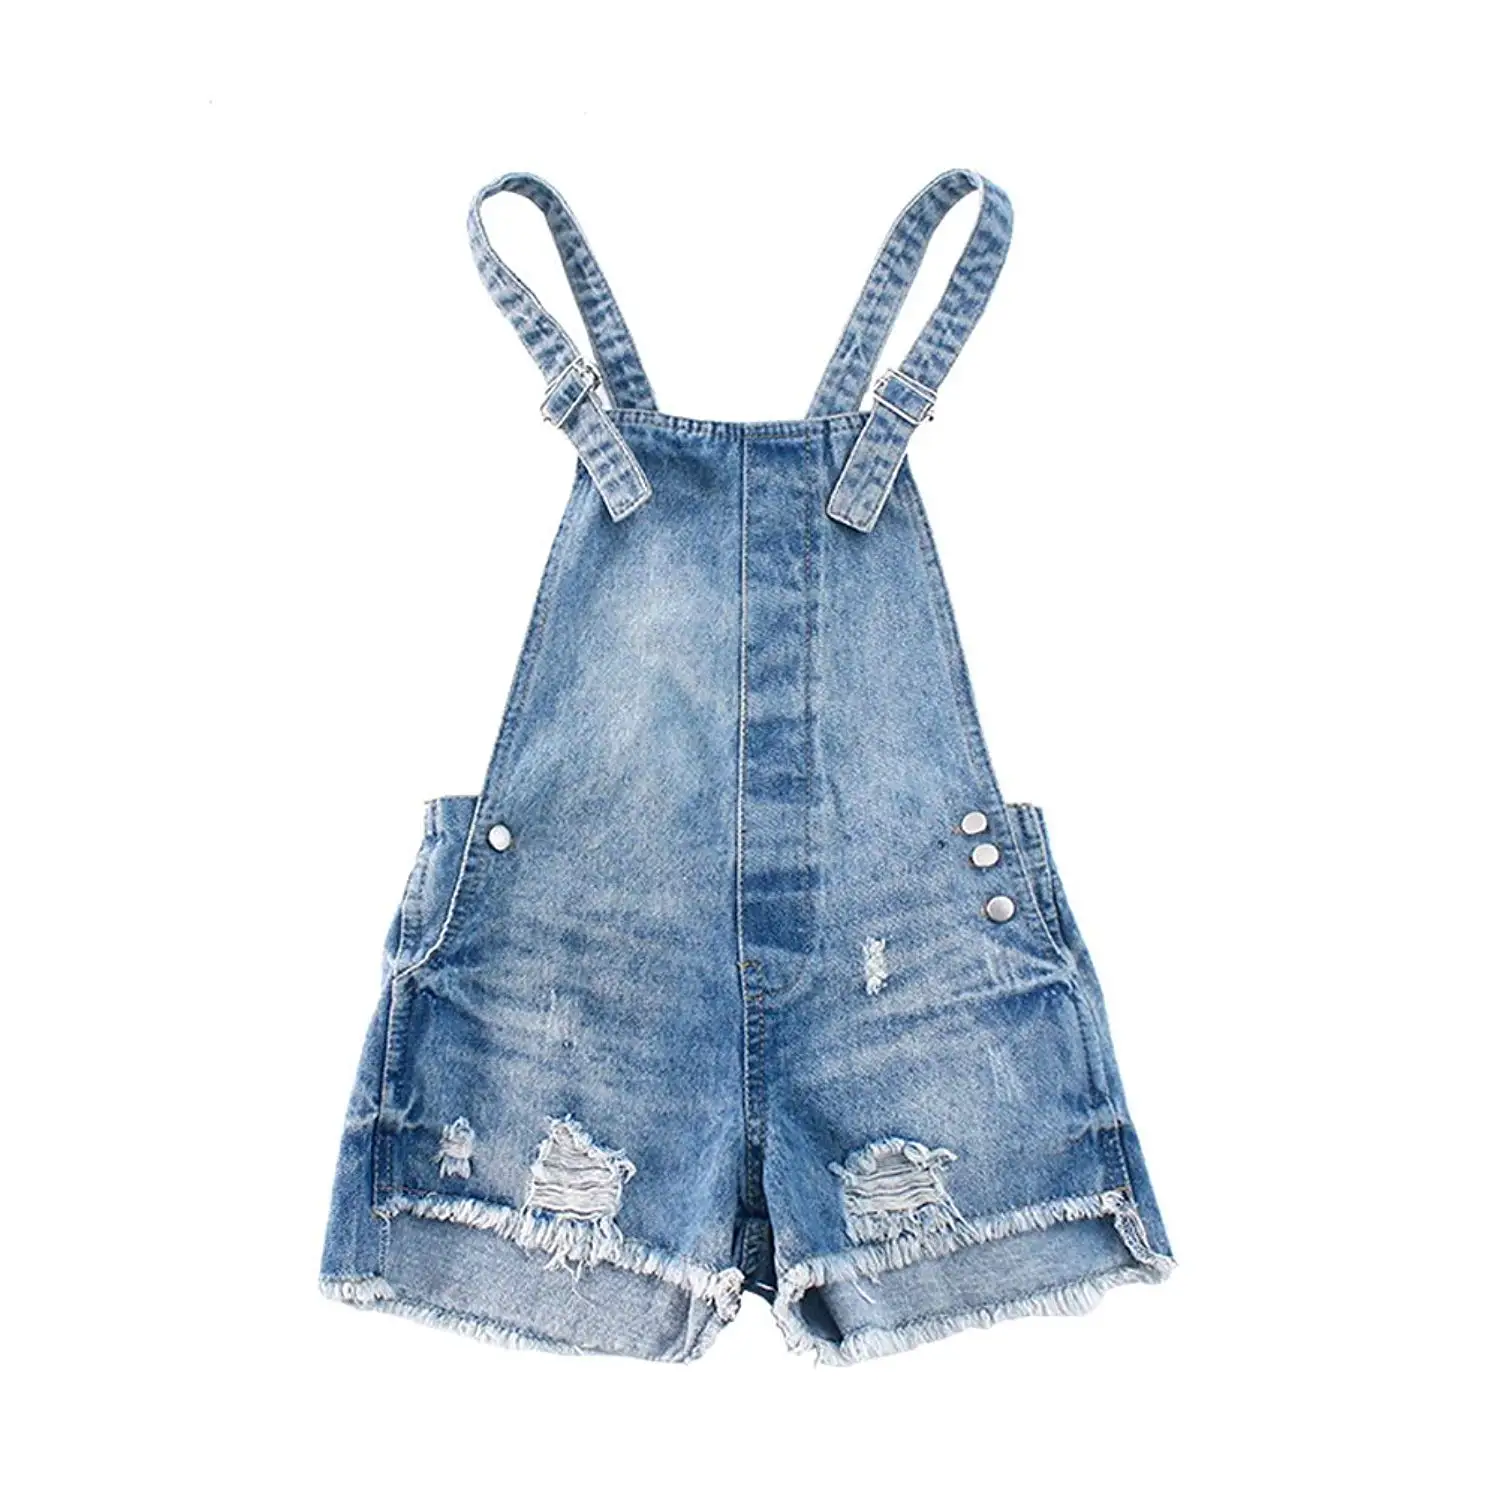 overall jean shorts mens